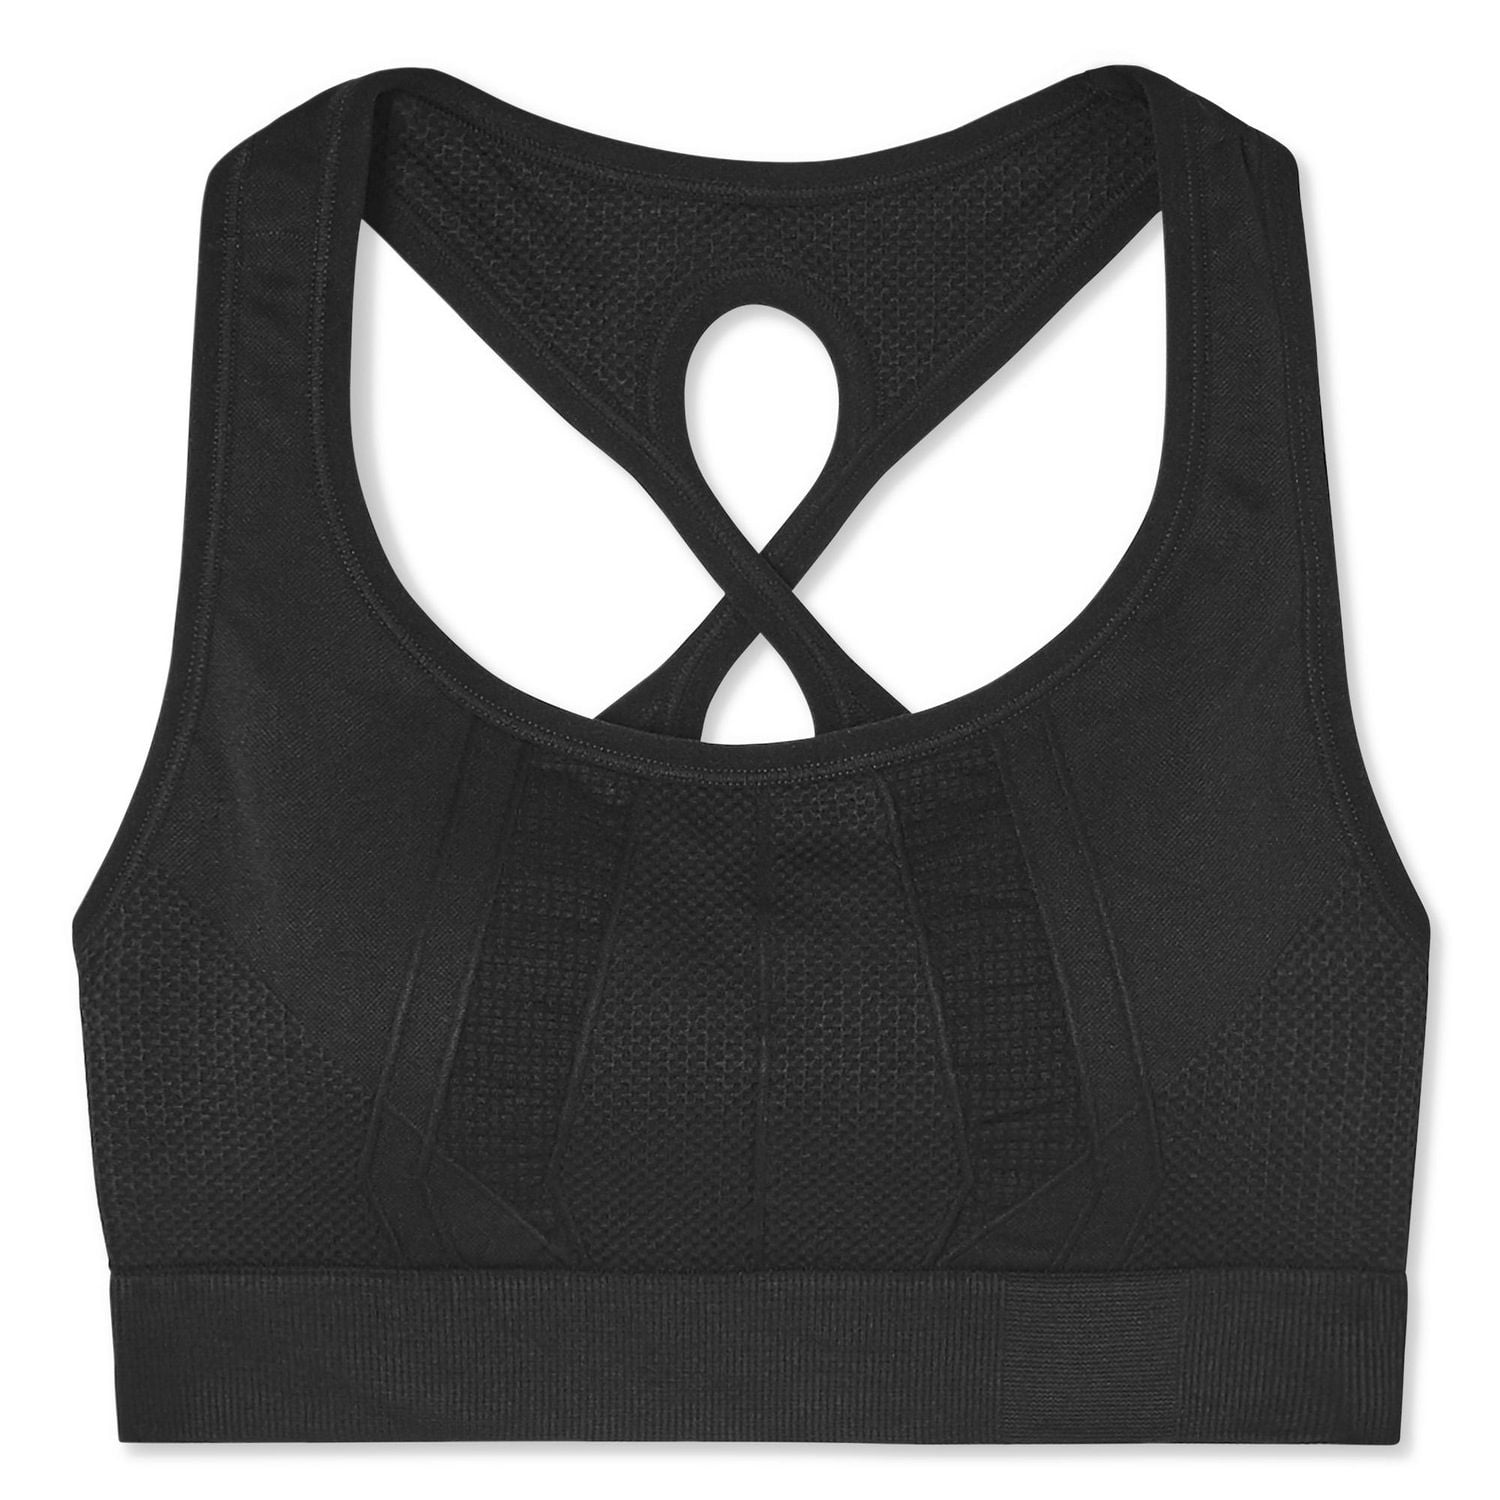 Athletic Works Women's Adjustable Back Sports Bra (40c), Delivery Near You